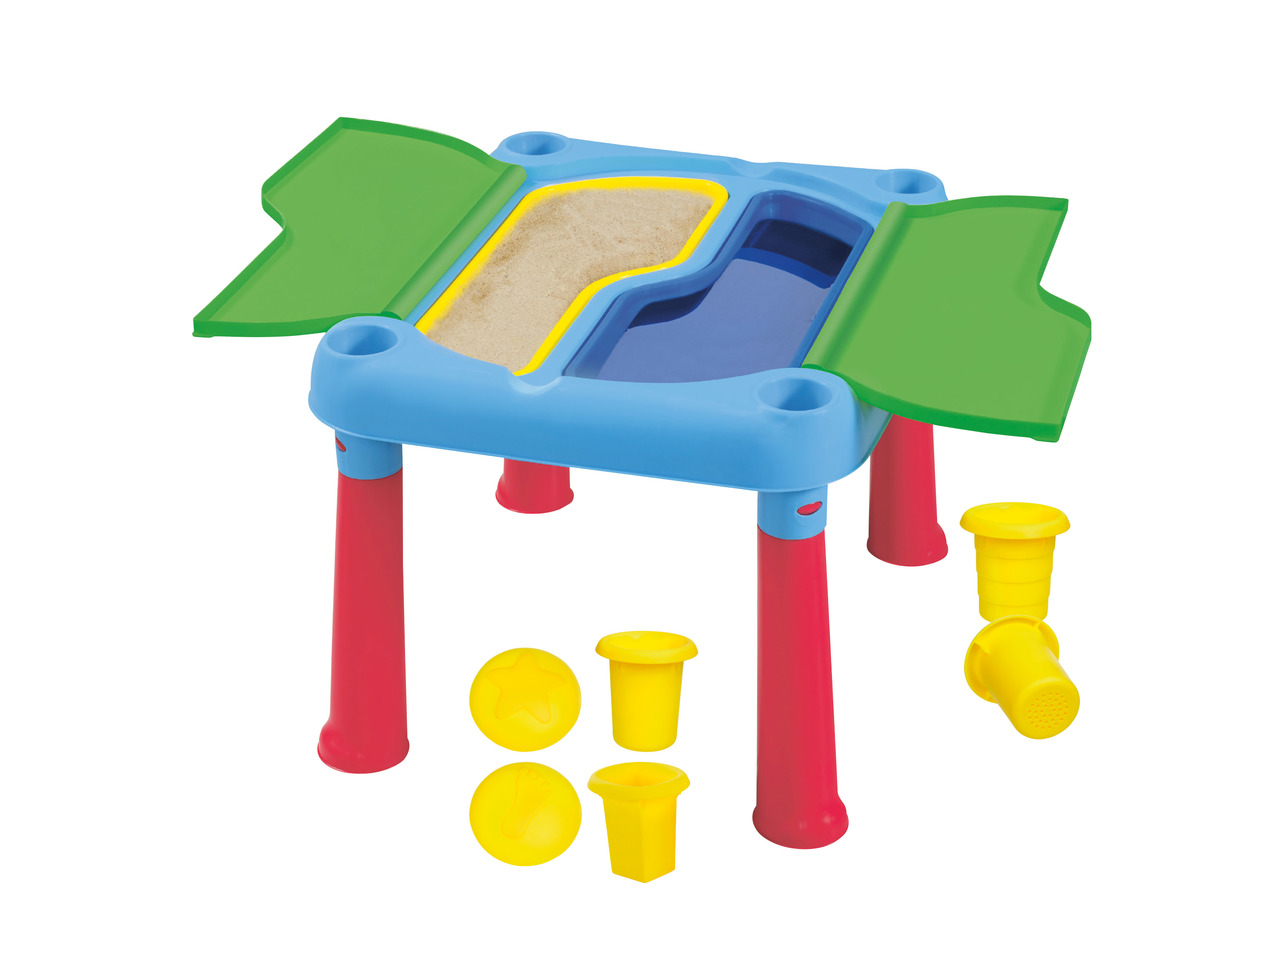 Playtive Junior Sand and Water Table1